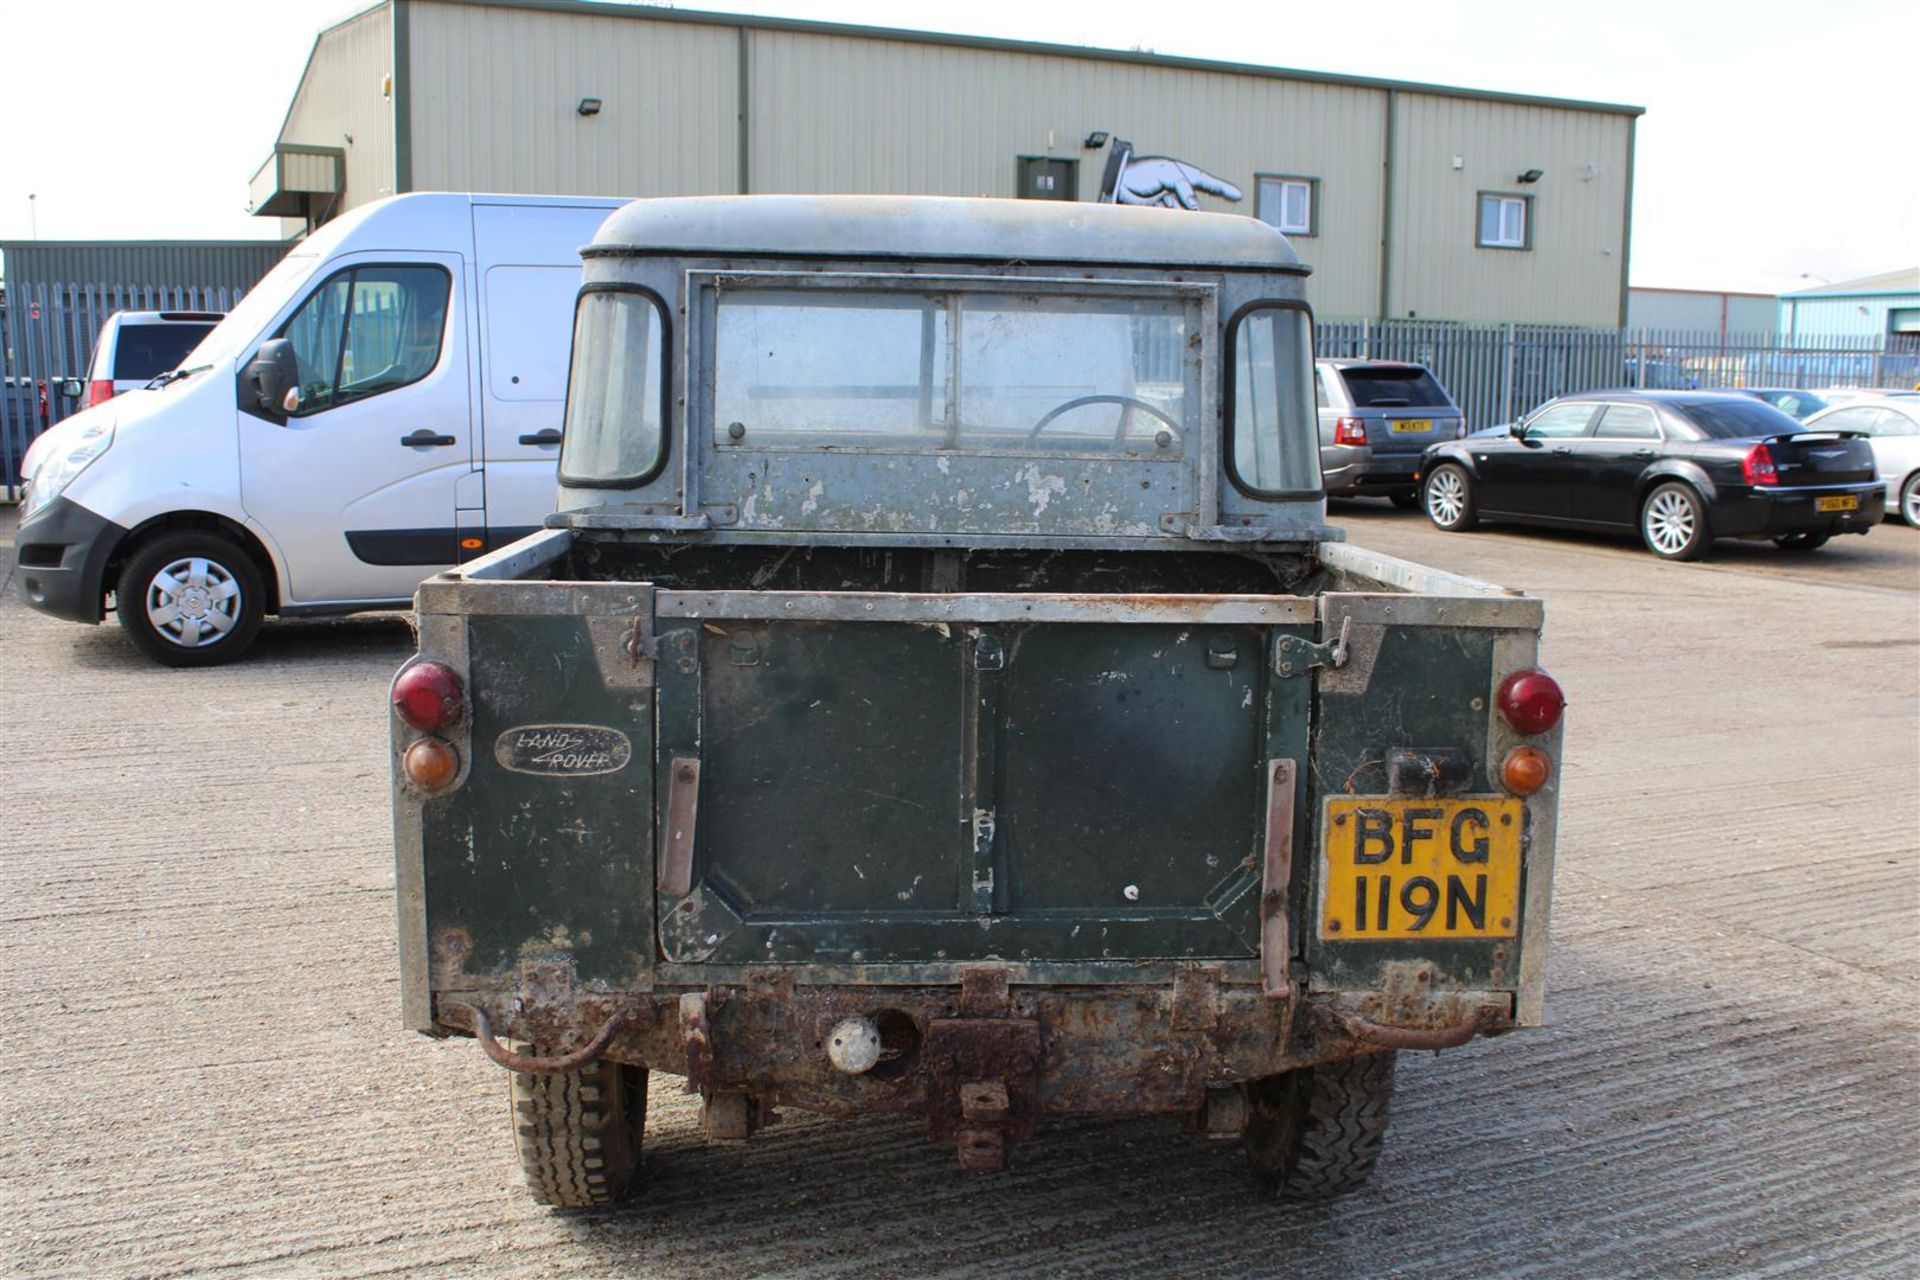 1974 Land Rover Series III Pick-up - Image 4 of 22